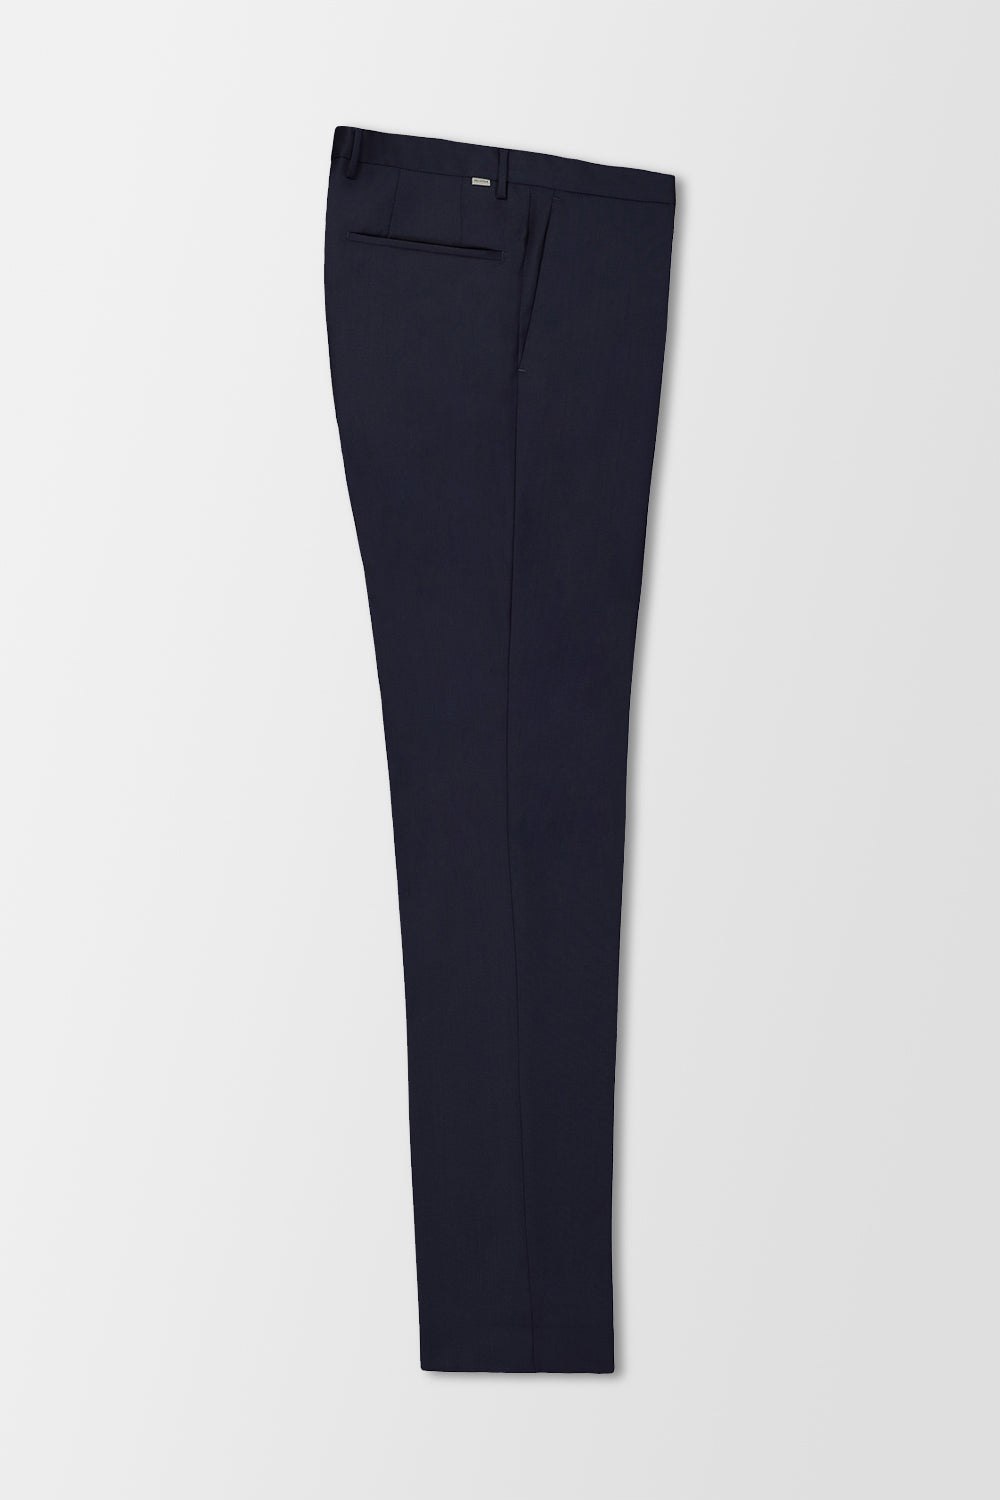 Incotex Navy Classic Trousers